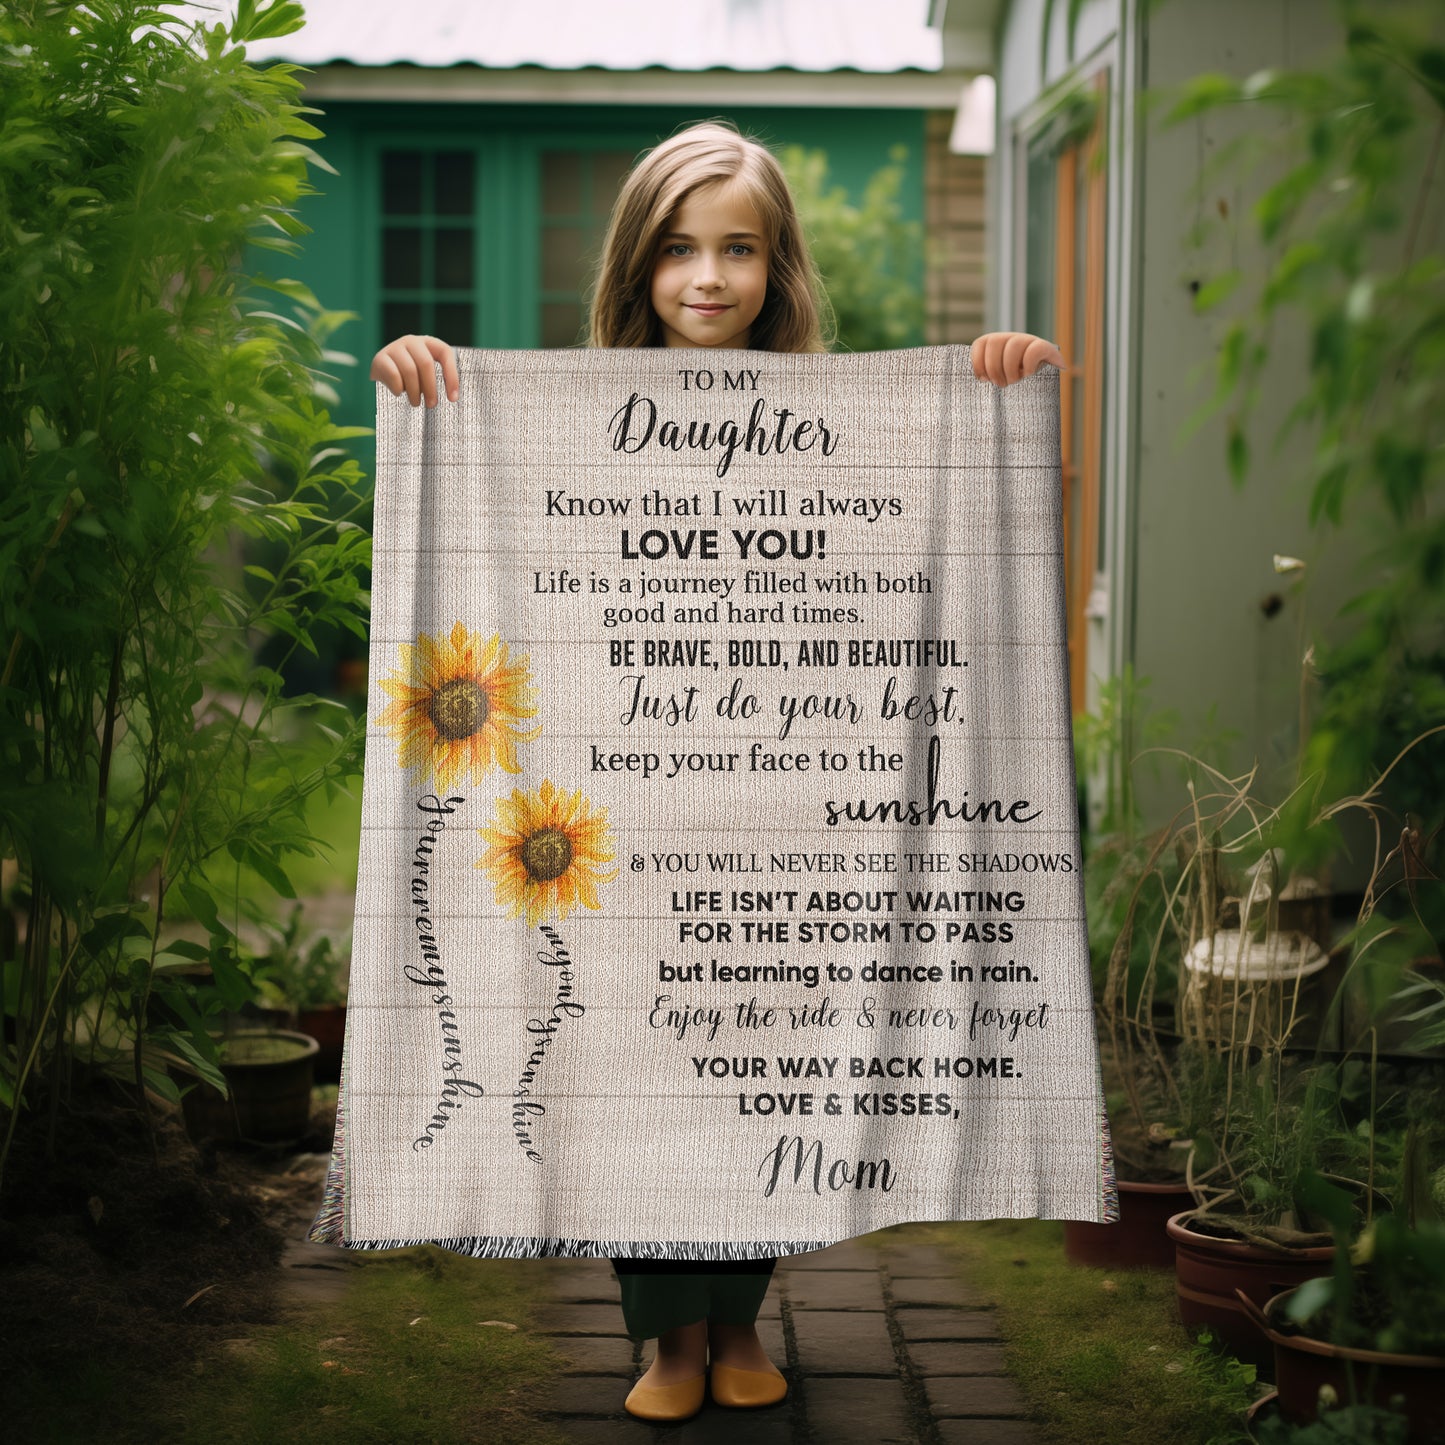 To My Daughter Be Brave, Bold and Beautiful - Life is Learning to Dance in the Rain Inspirational Heirloom Woven Blanket